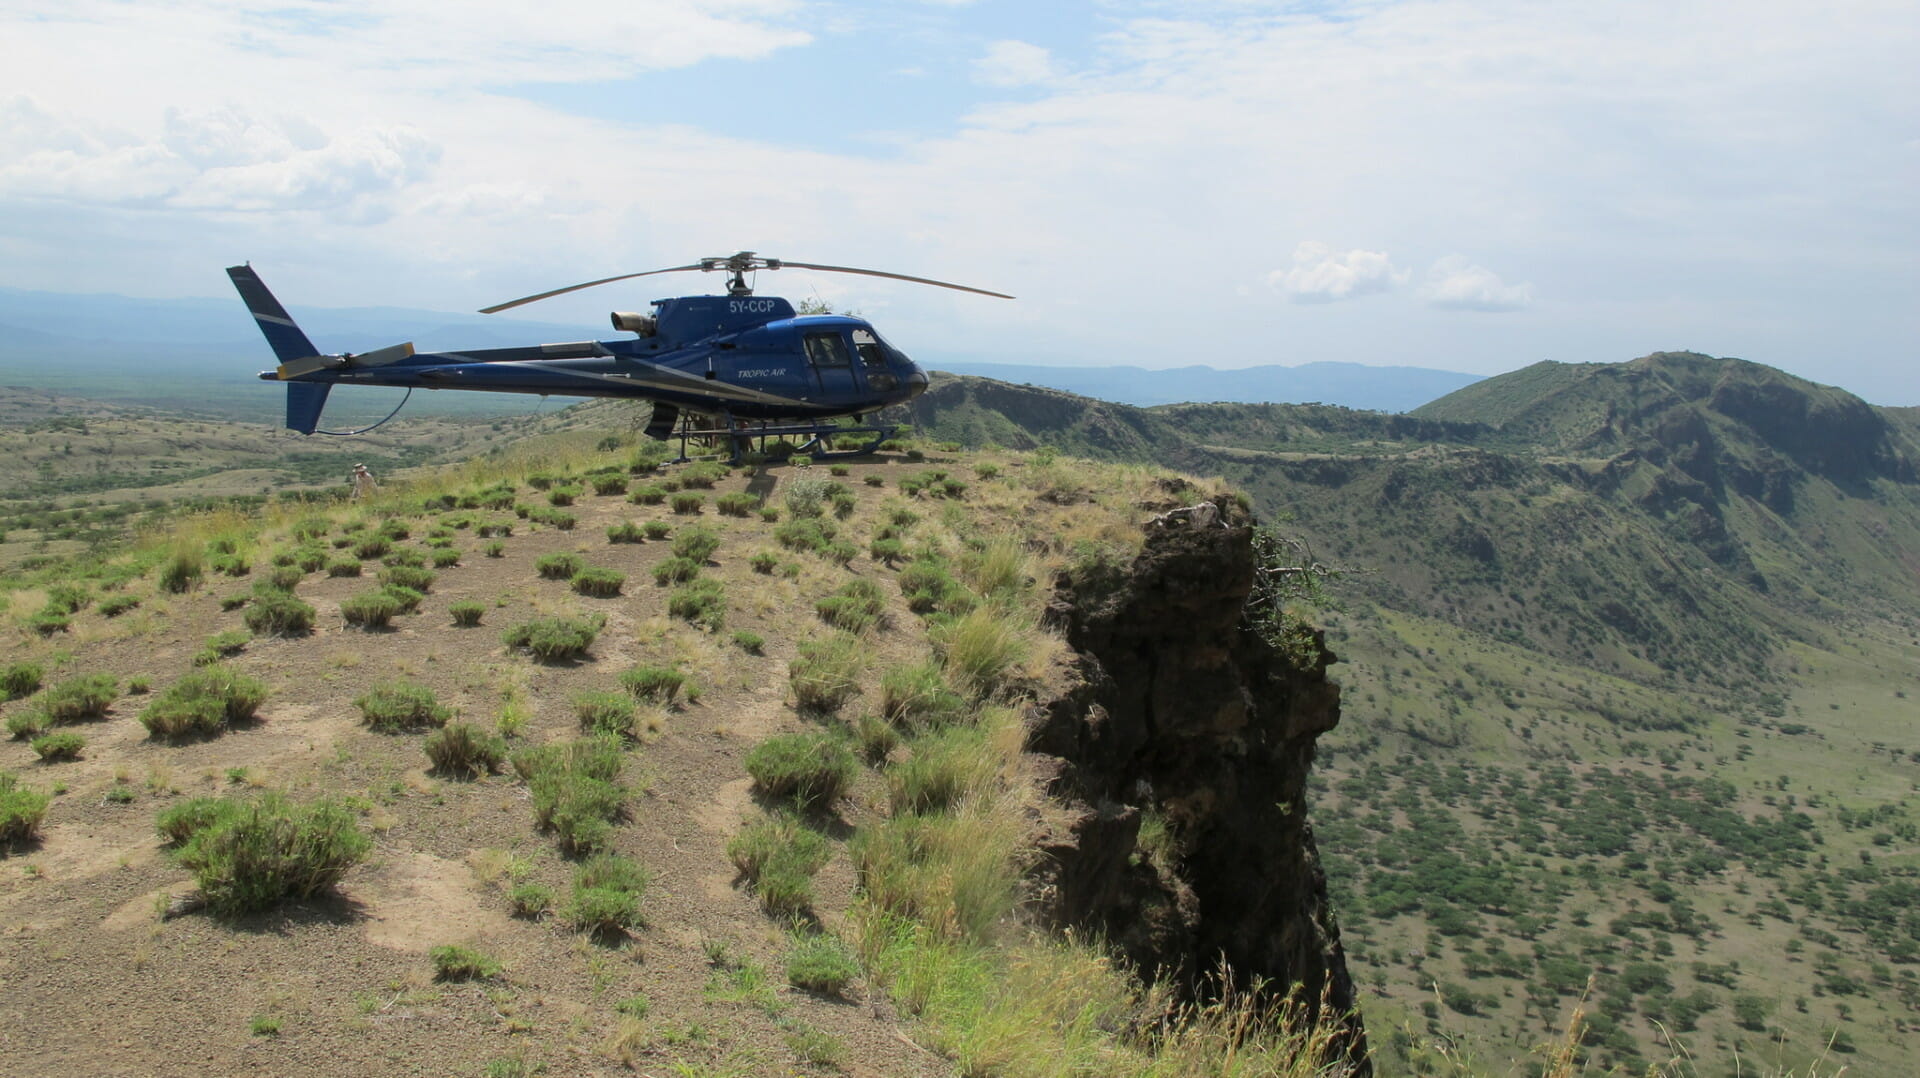 Northern Kenya by helicopter